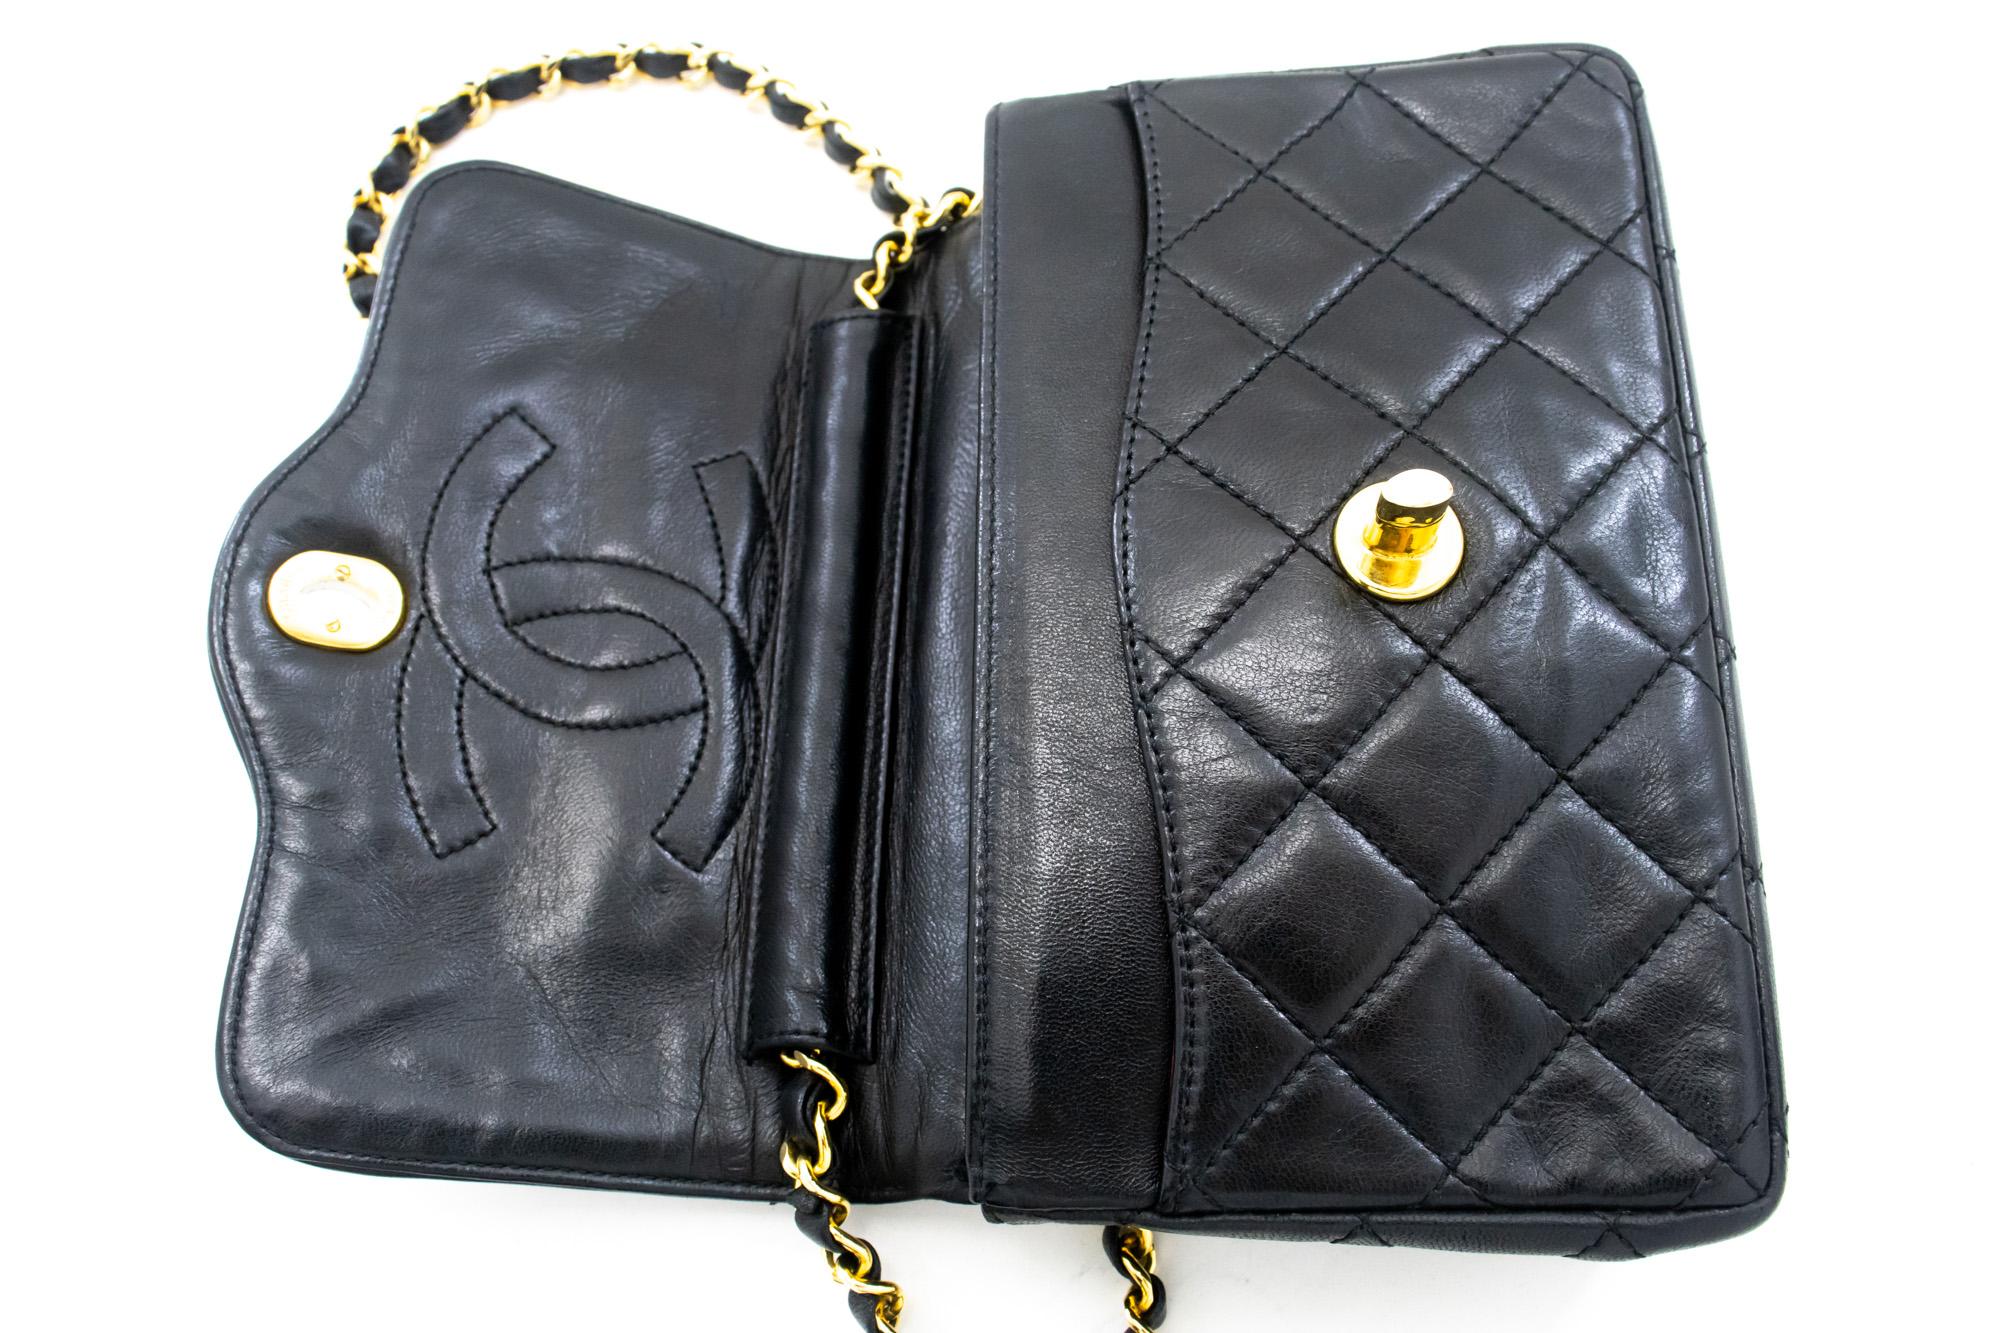 CHANEL Paris Limited Small Chain Shoulder Bag Black Flap Quilted For Sale 6